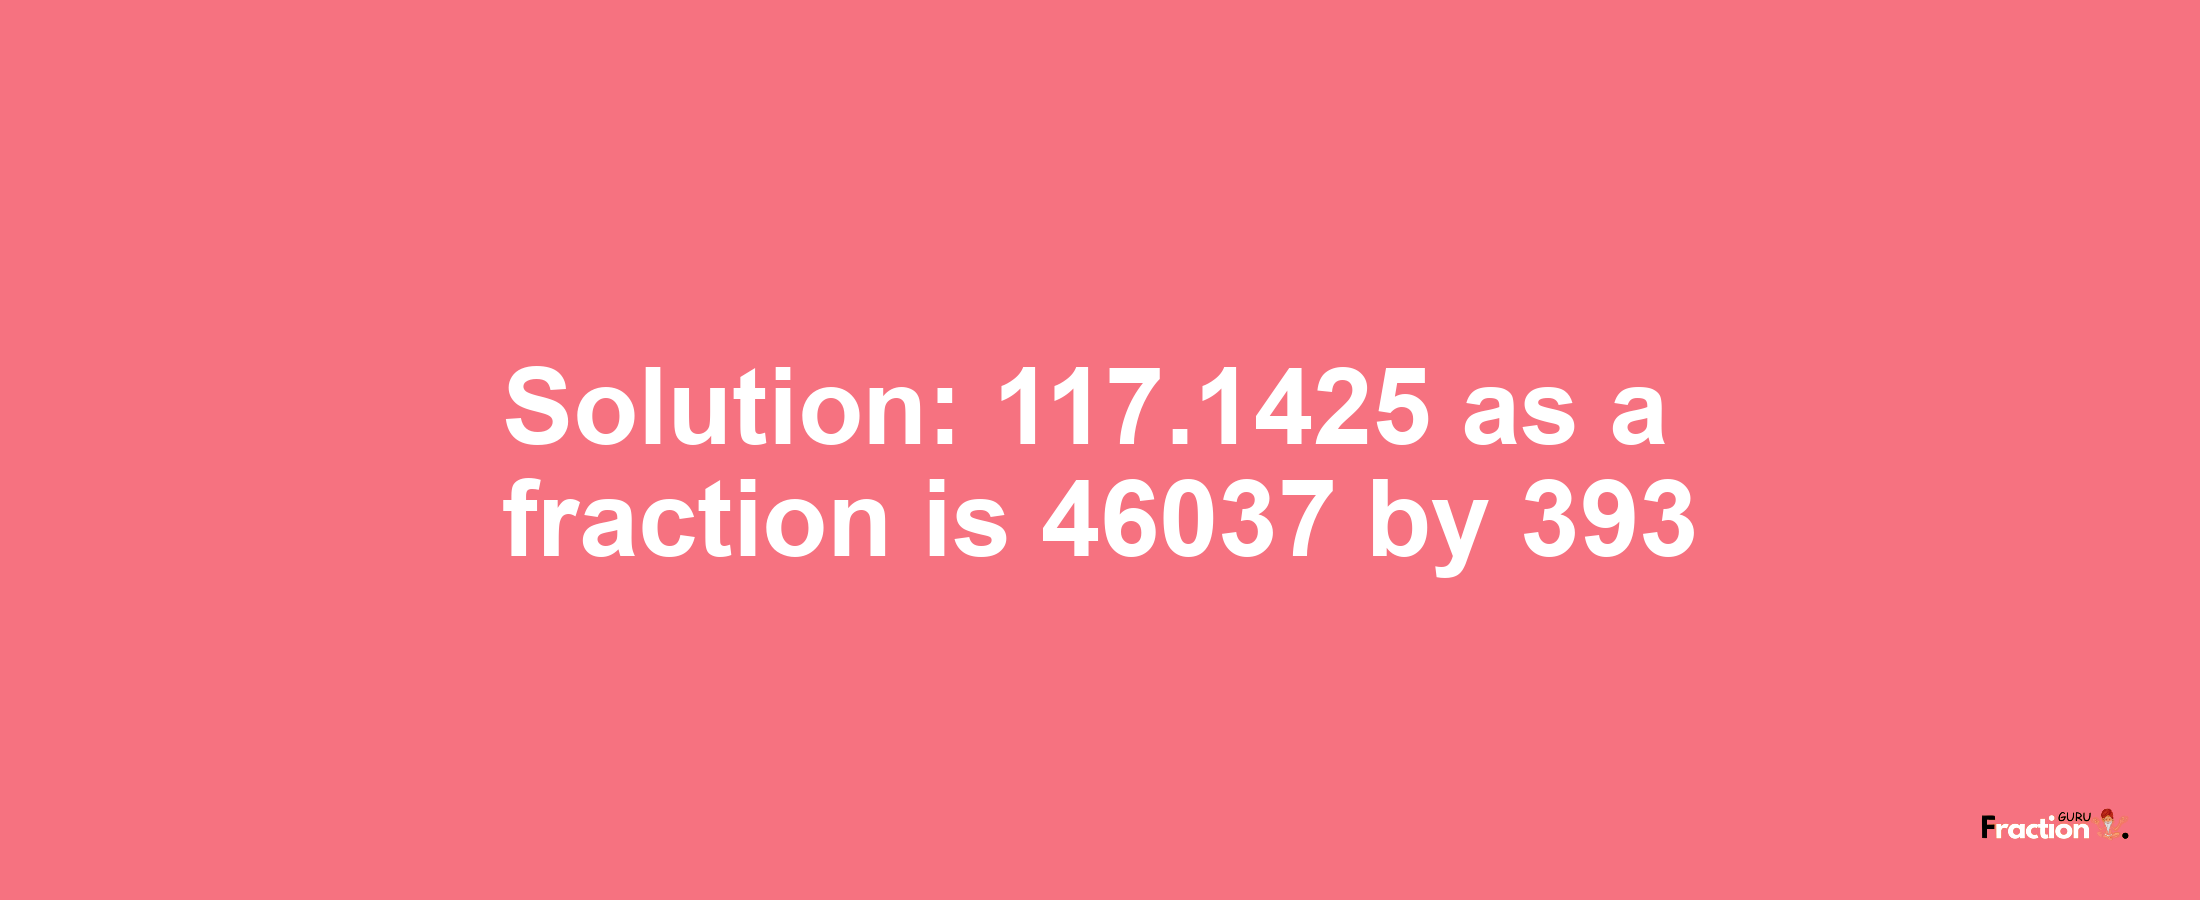 Solution:117.1425 as a fraction is 46037/393